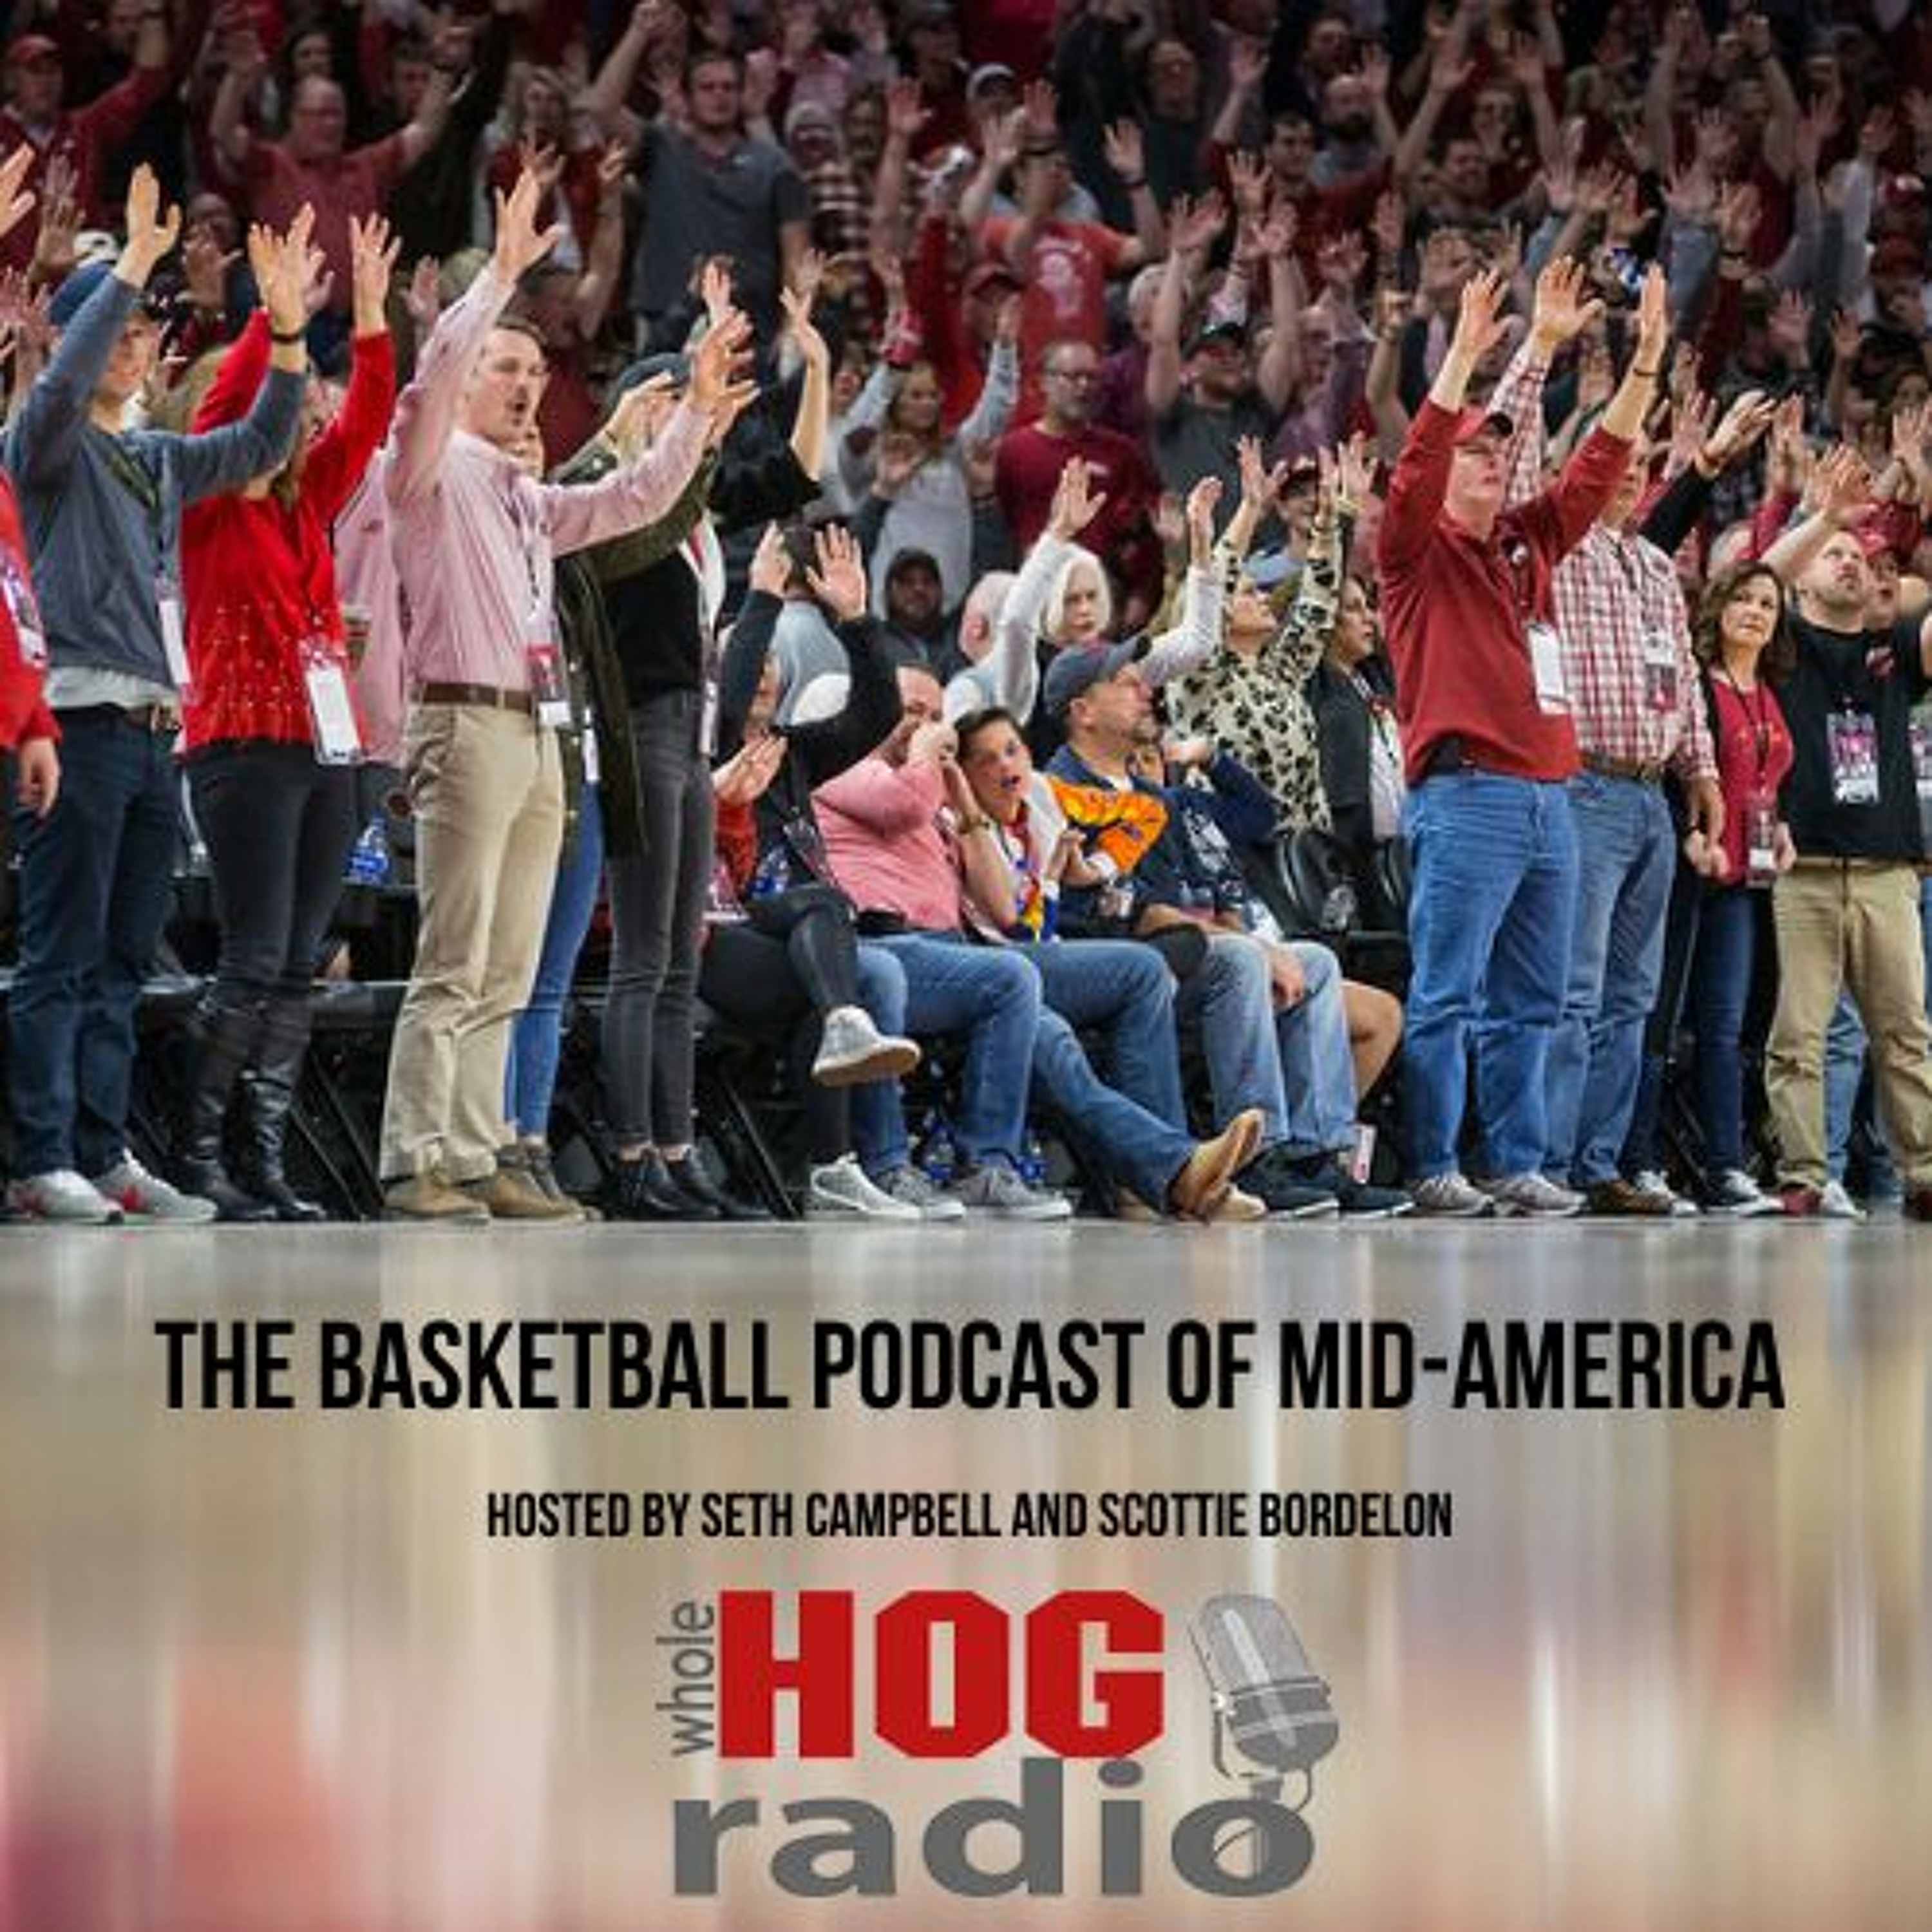 Basketball Podcast of Mid-America: "Vegas Vance" proves big for Hogs; tough week ahead